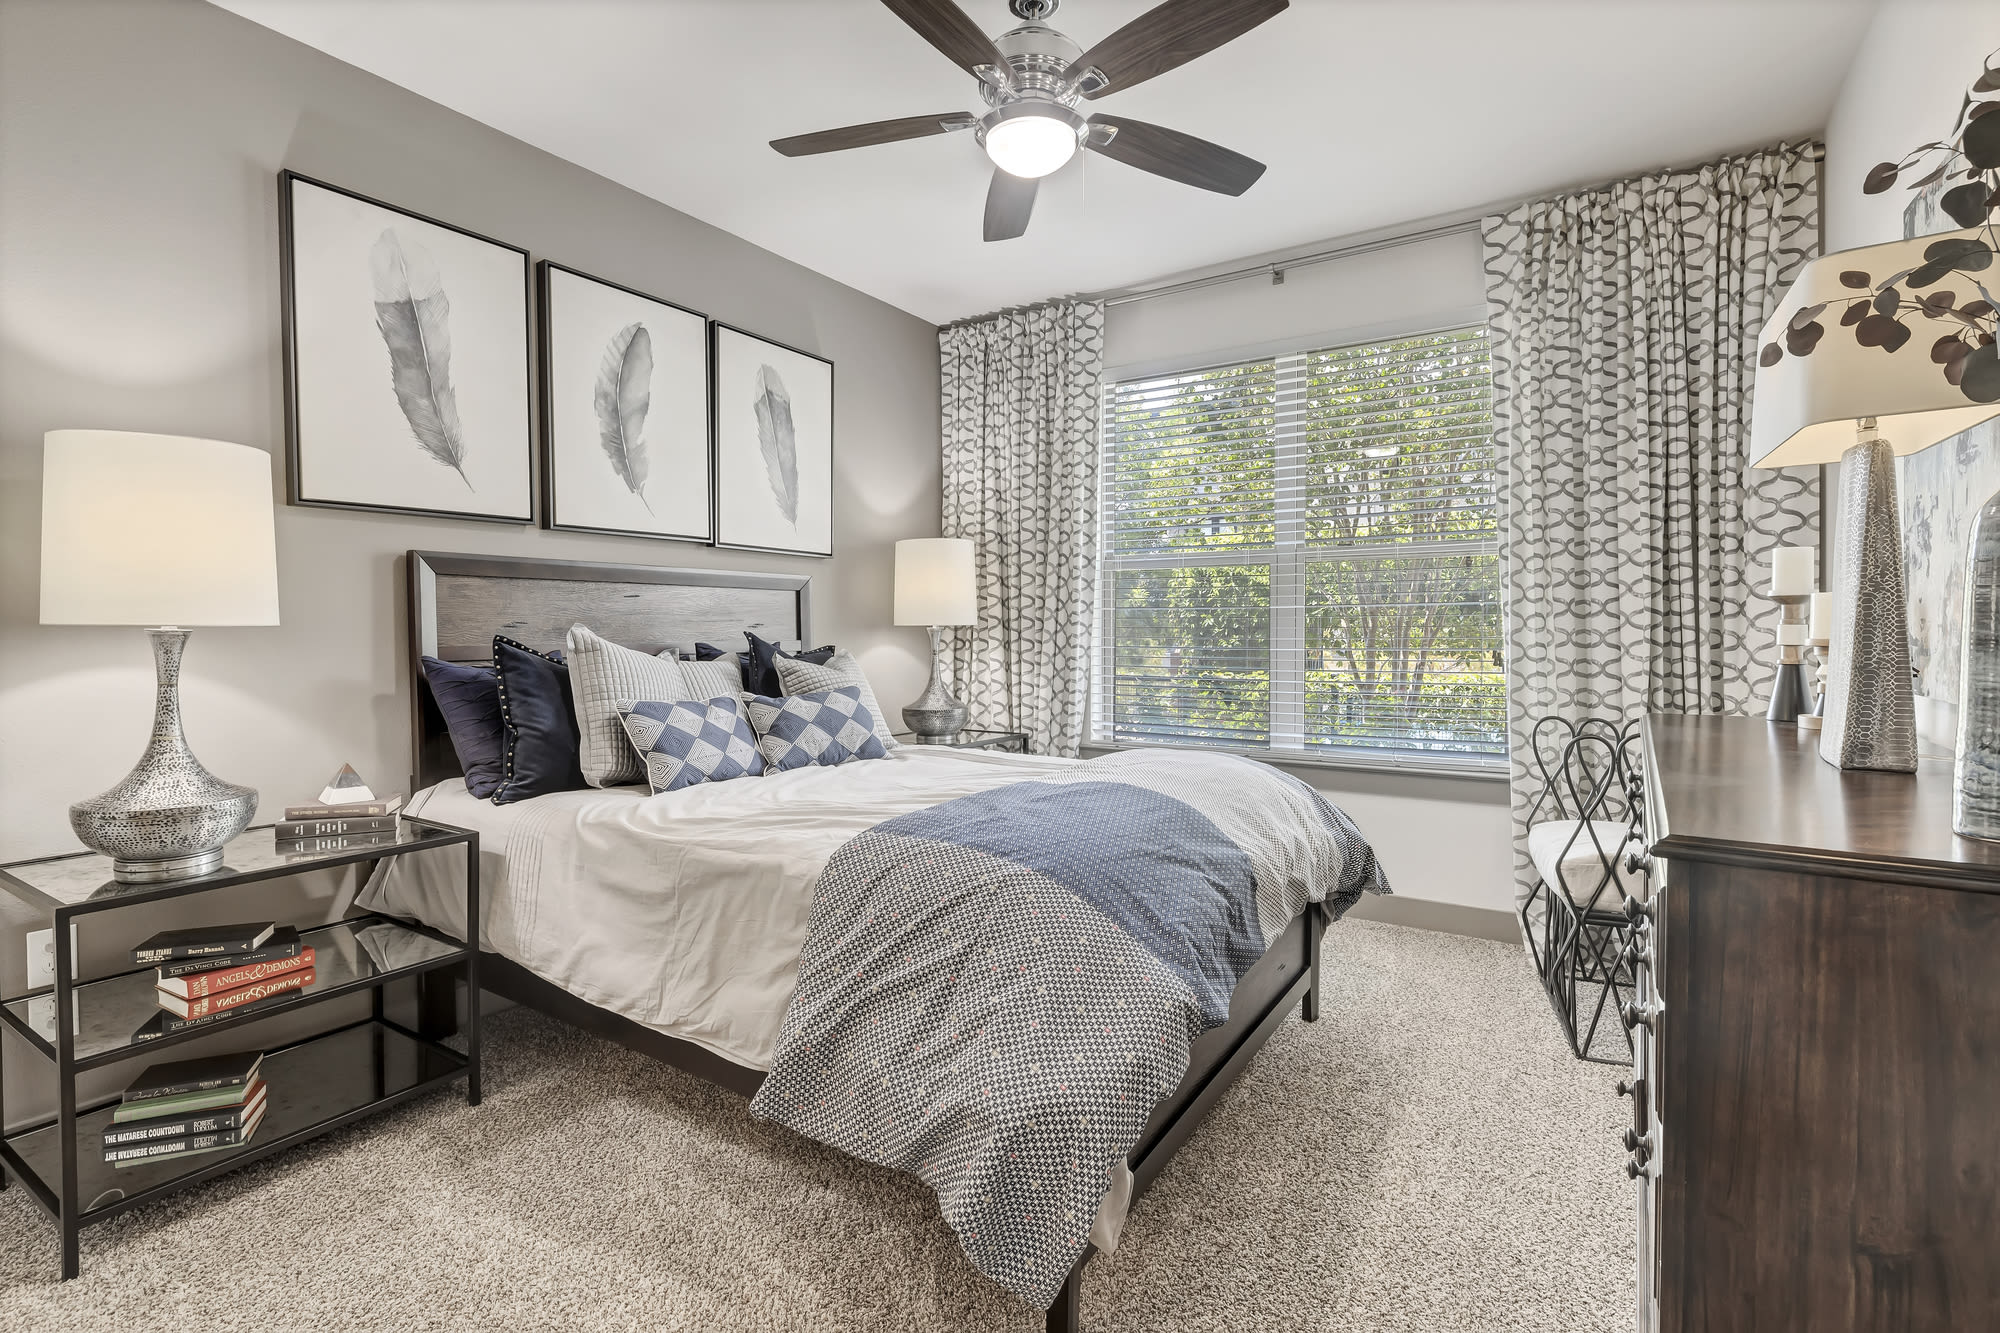 Bedroom with ceiling fan at Henley at The Rim in San Antonio, Texas